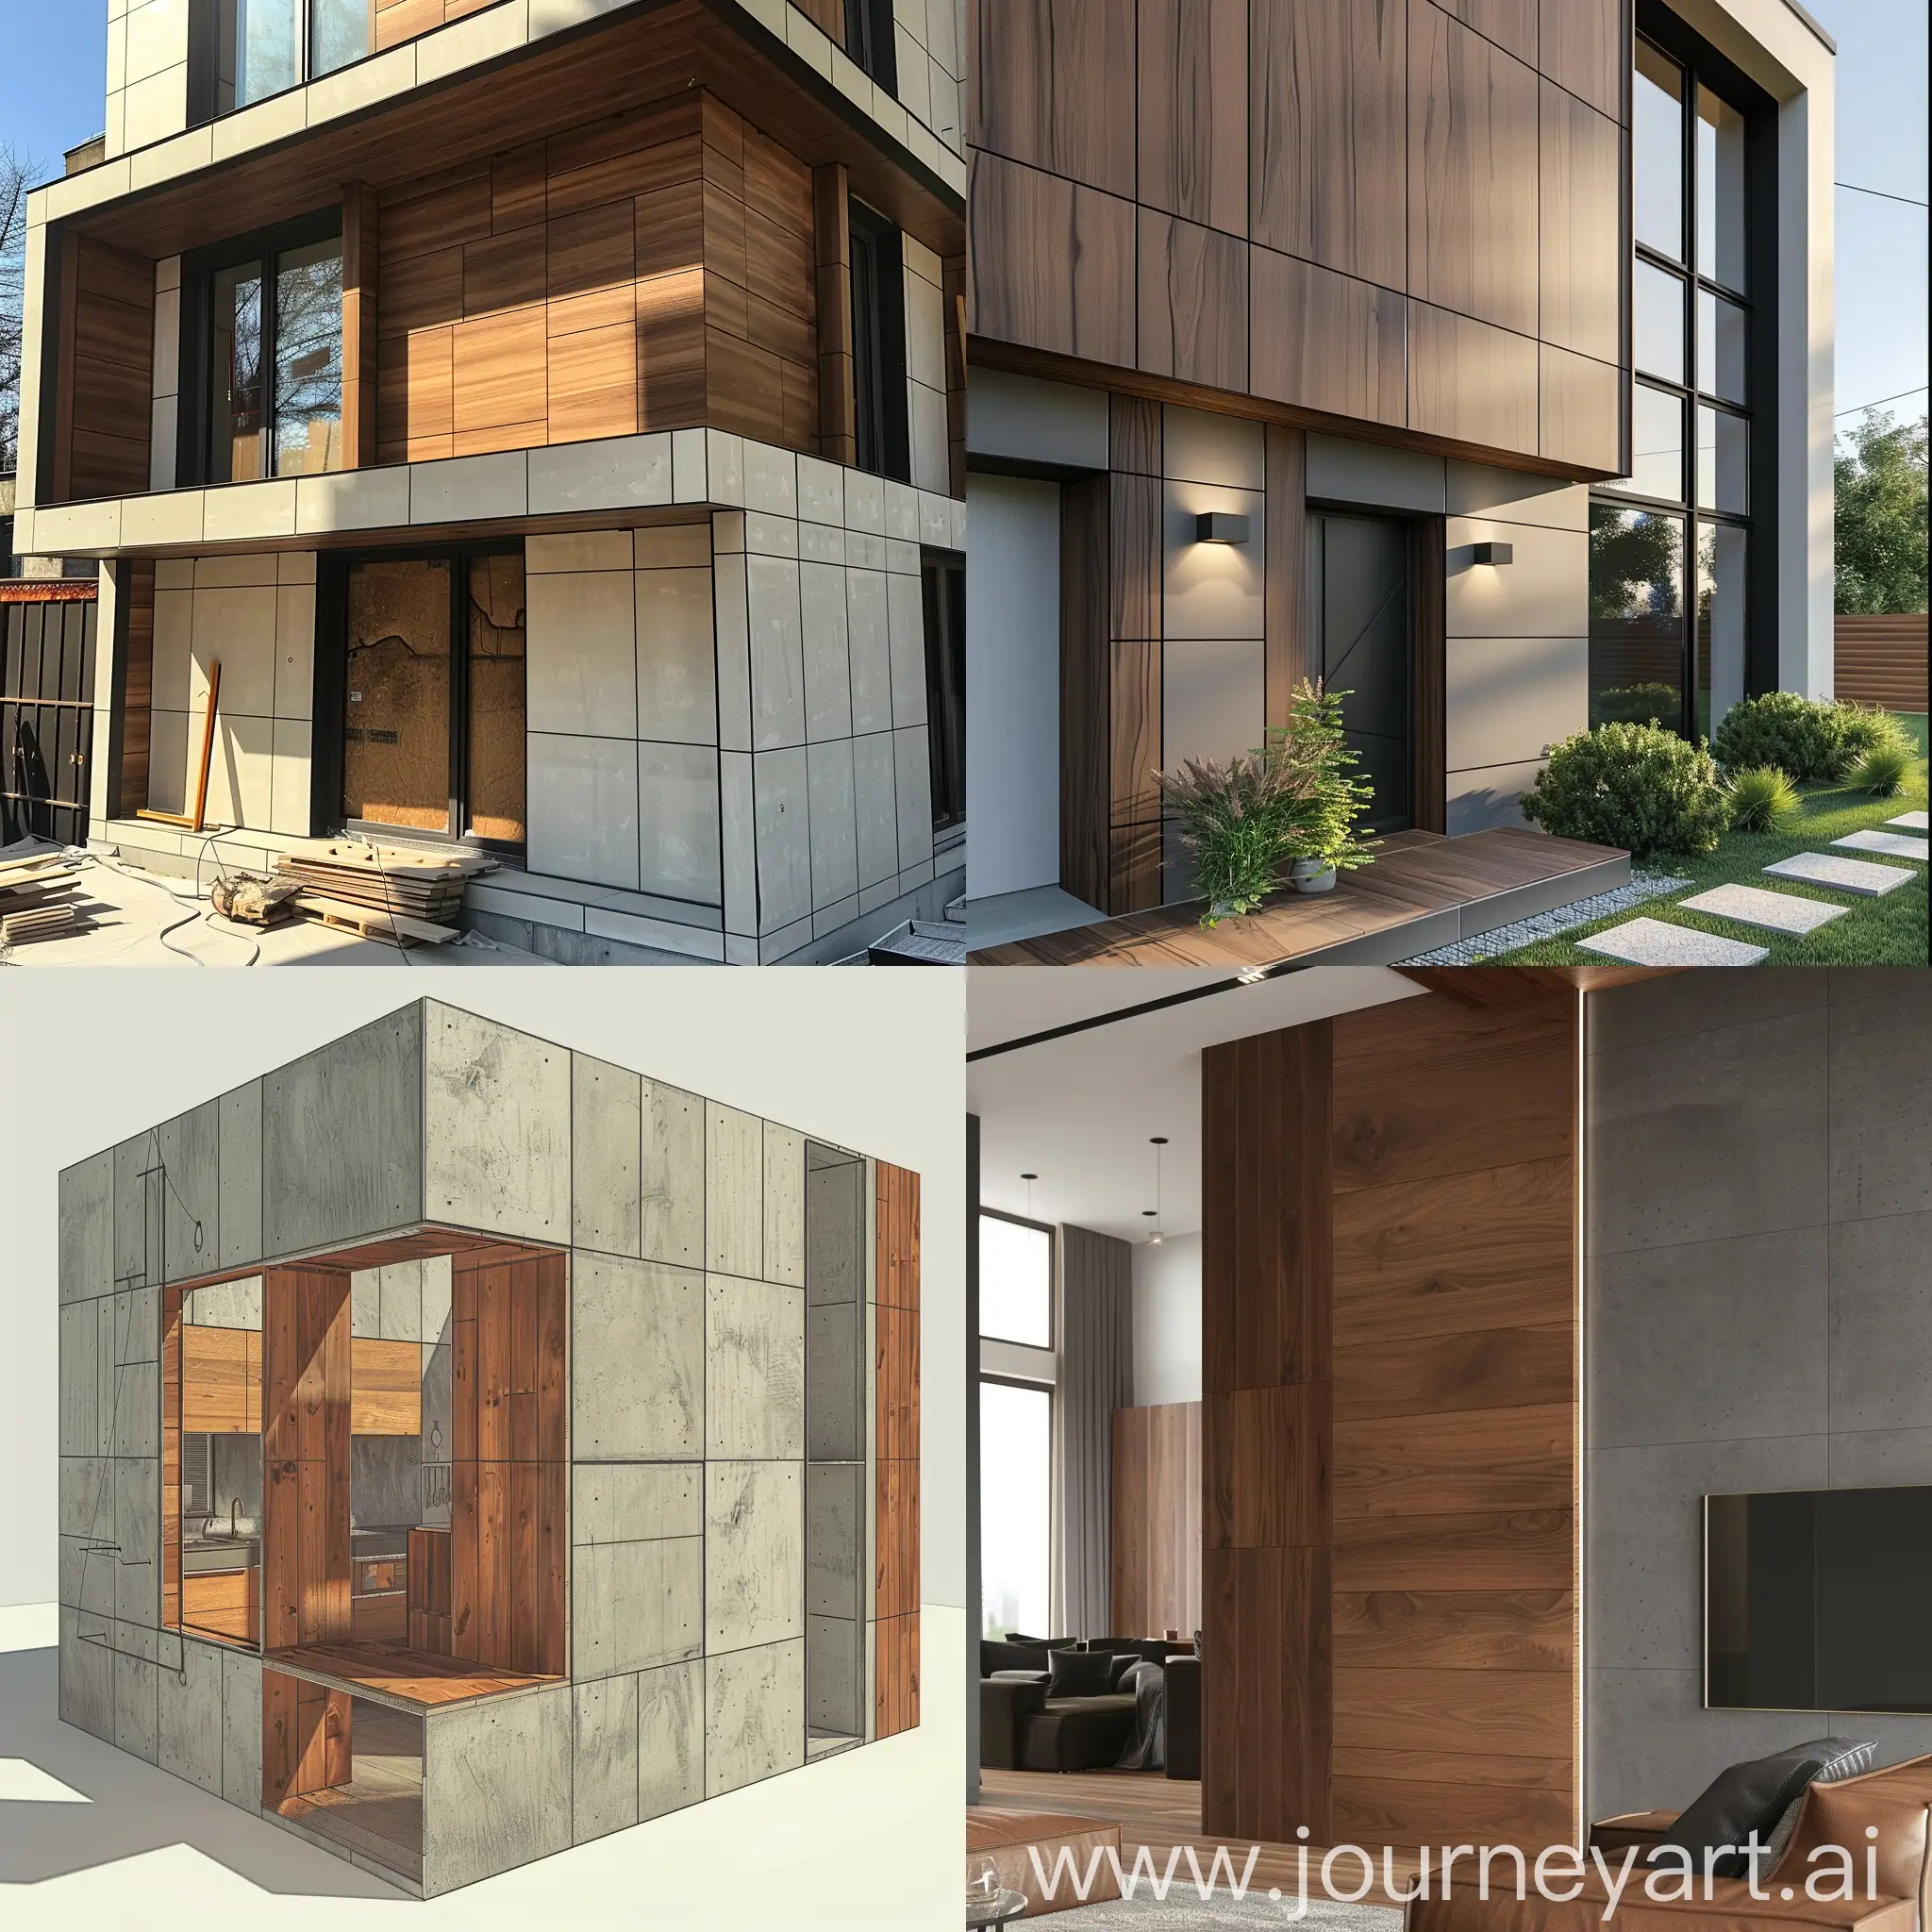 Modular-House-Construction-with-Decorative-Finishes-Imitation-Timber-and-Walnut-Wood-Color